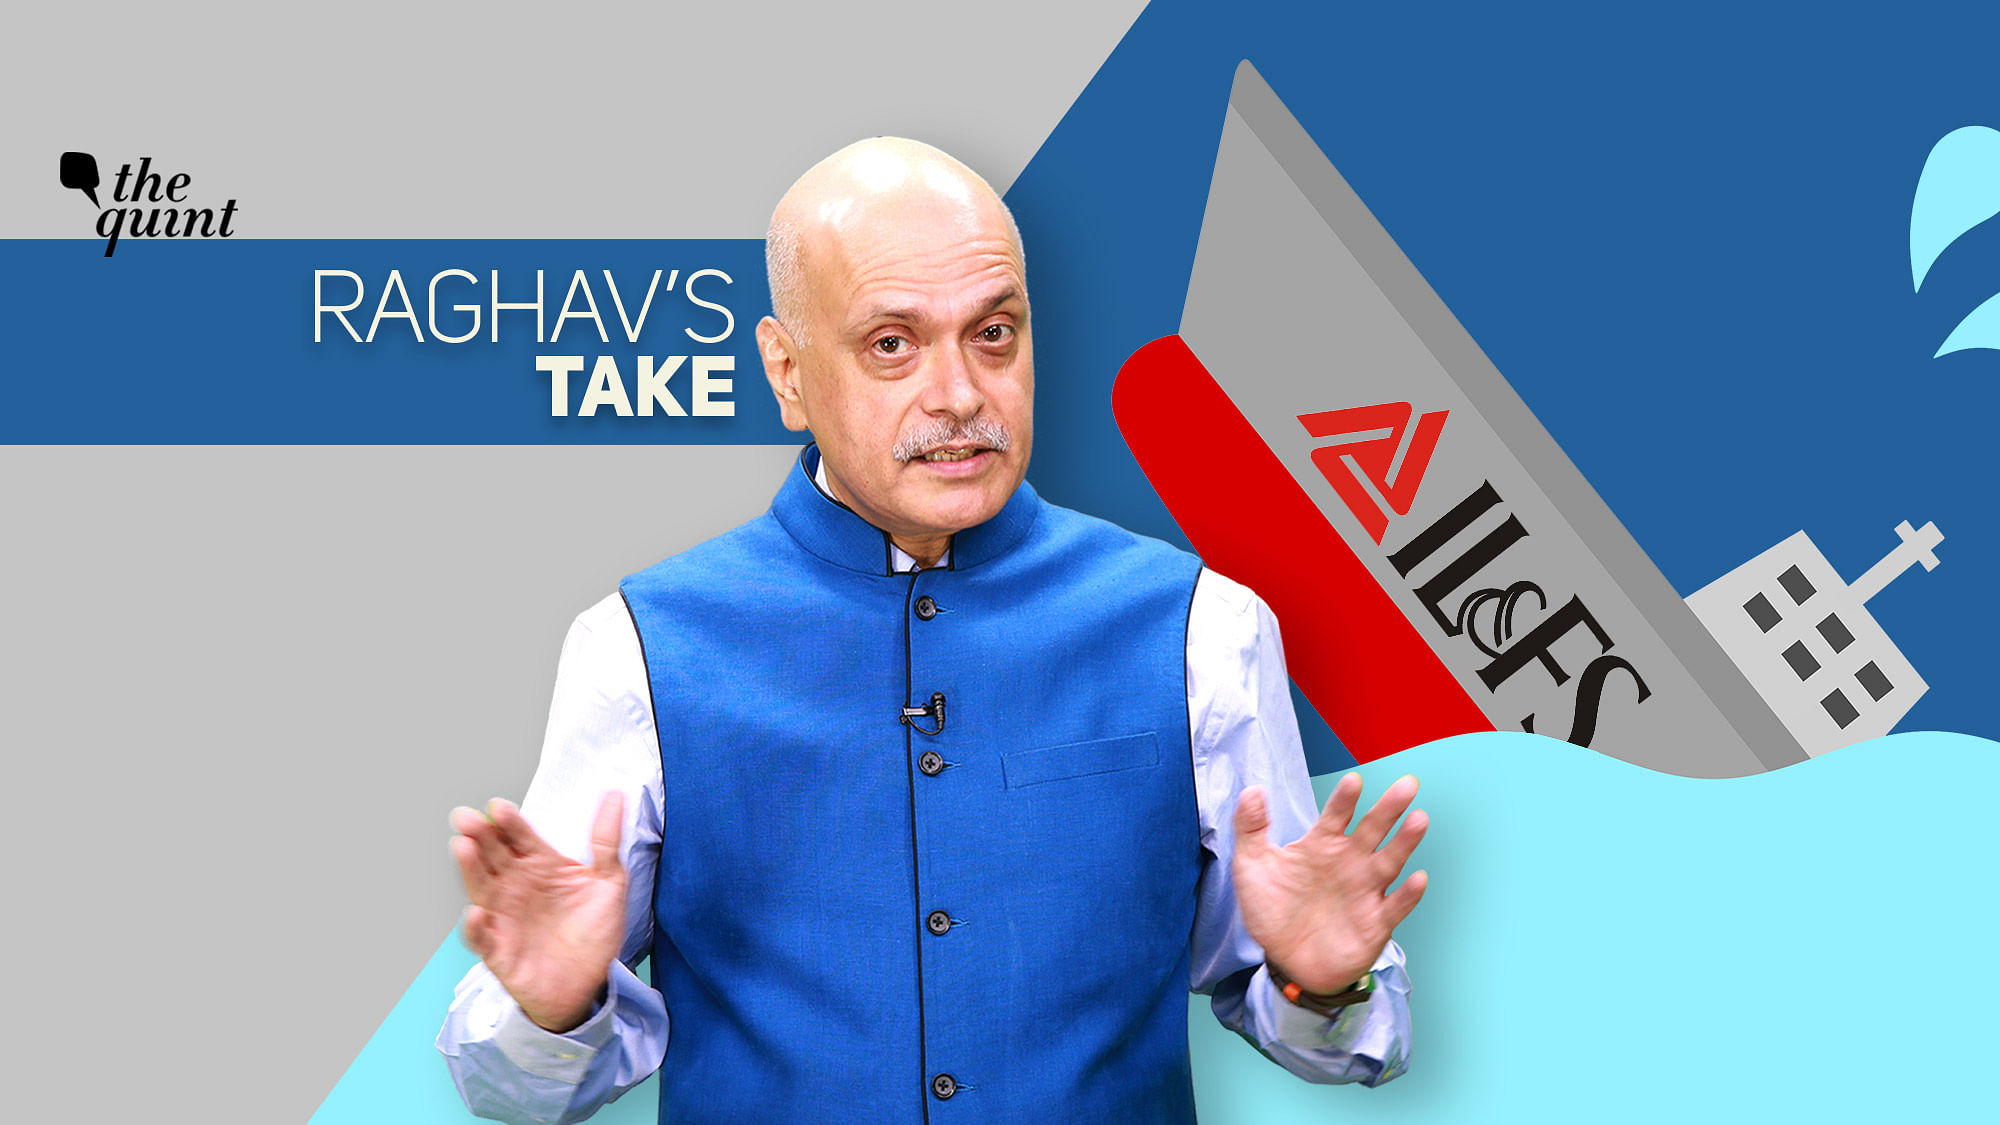 Image of The Quint’s Founder-Editor Raghav Bahl, and IL&amp;FS logo used for representational purposes.